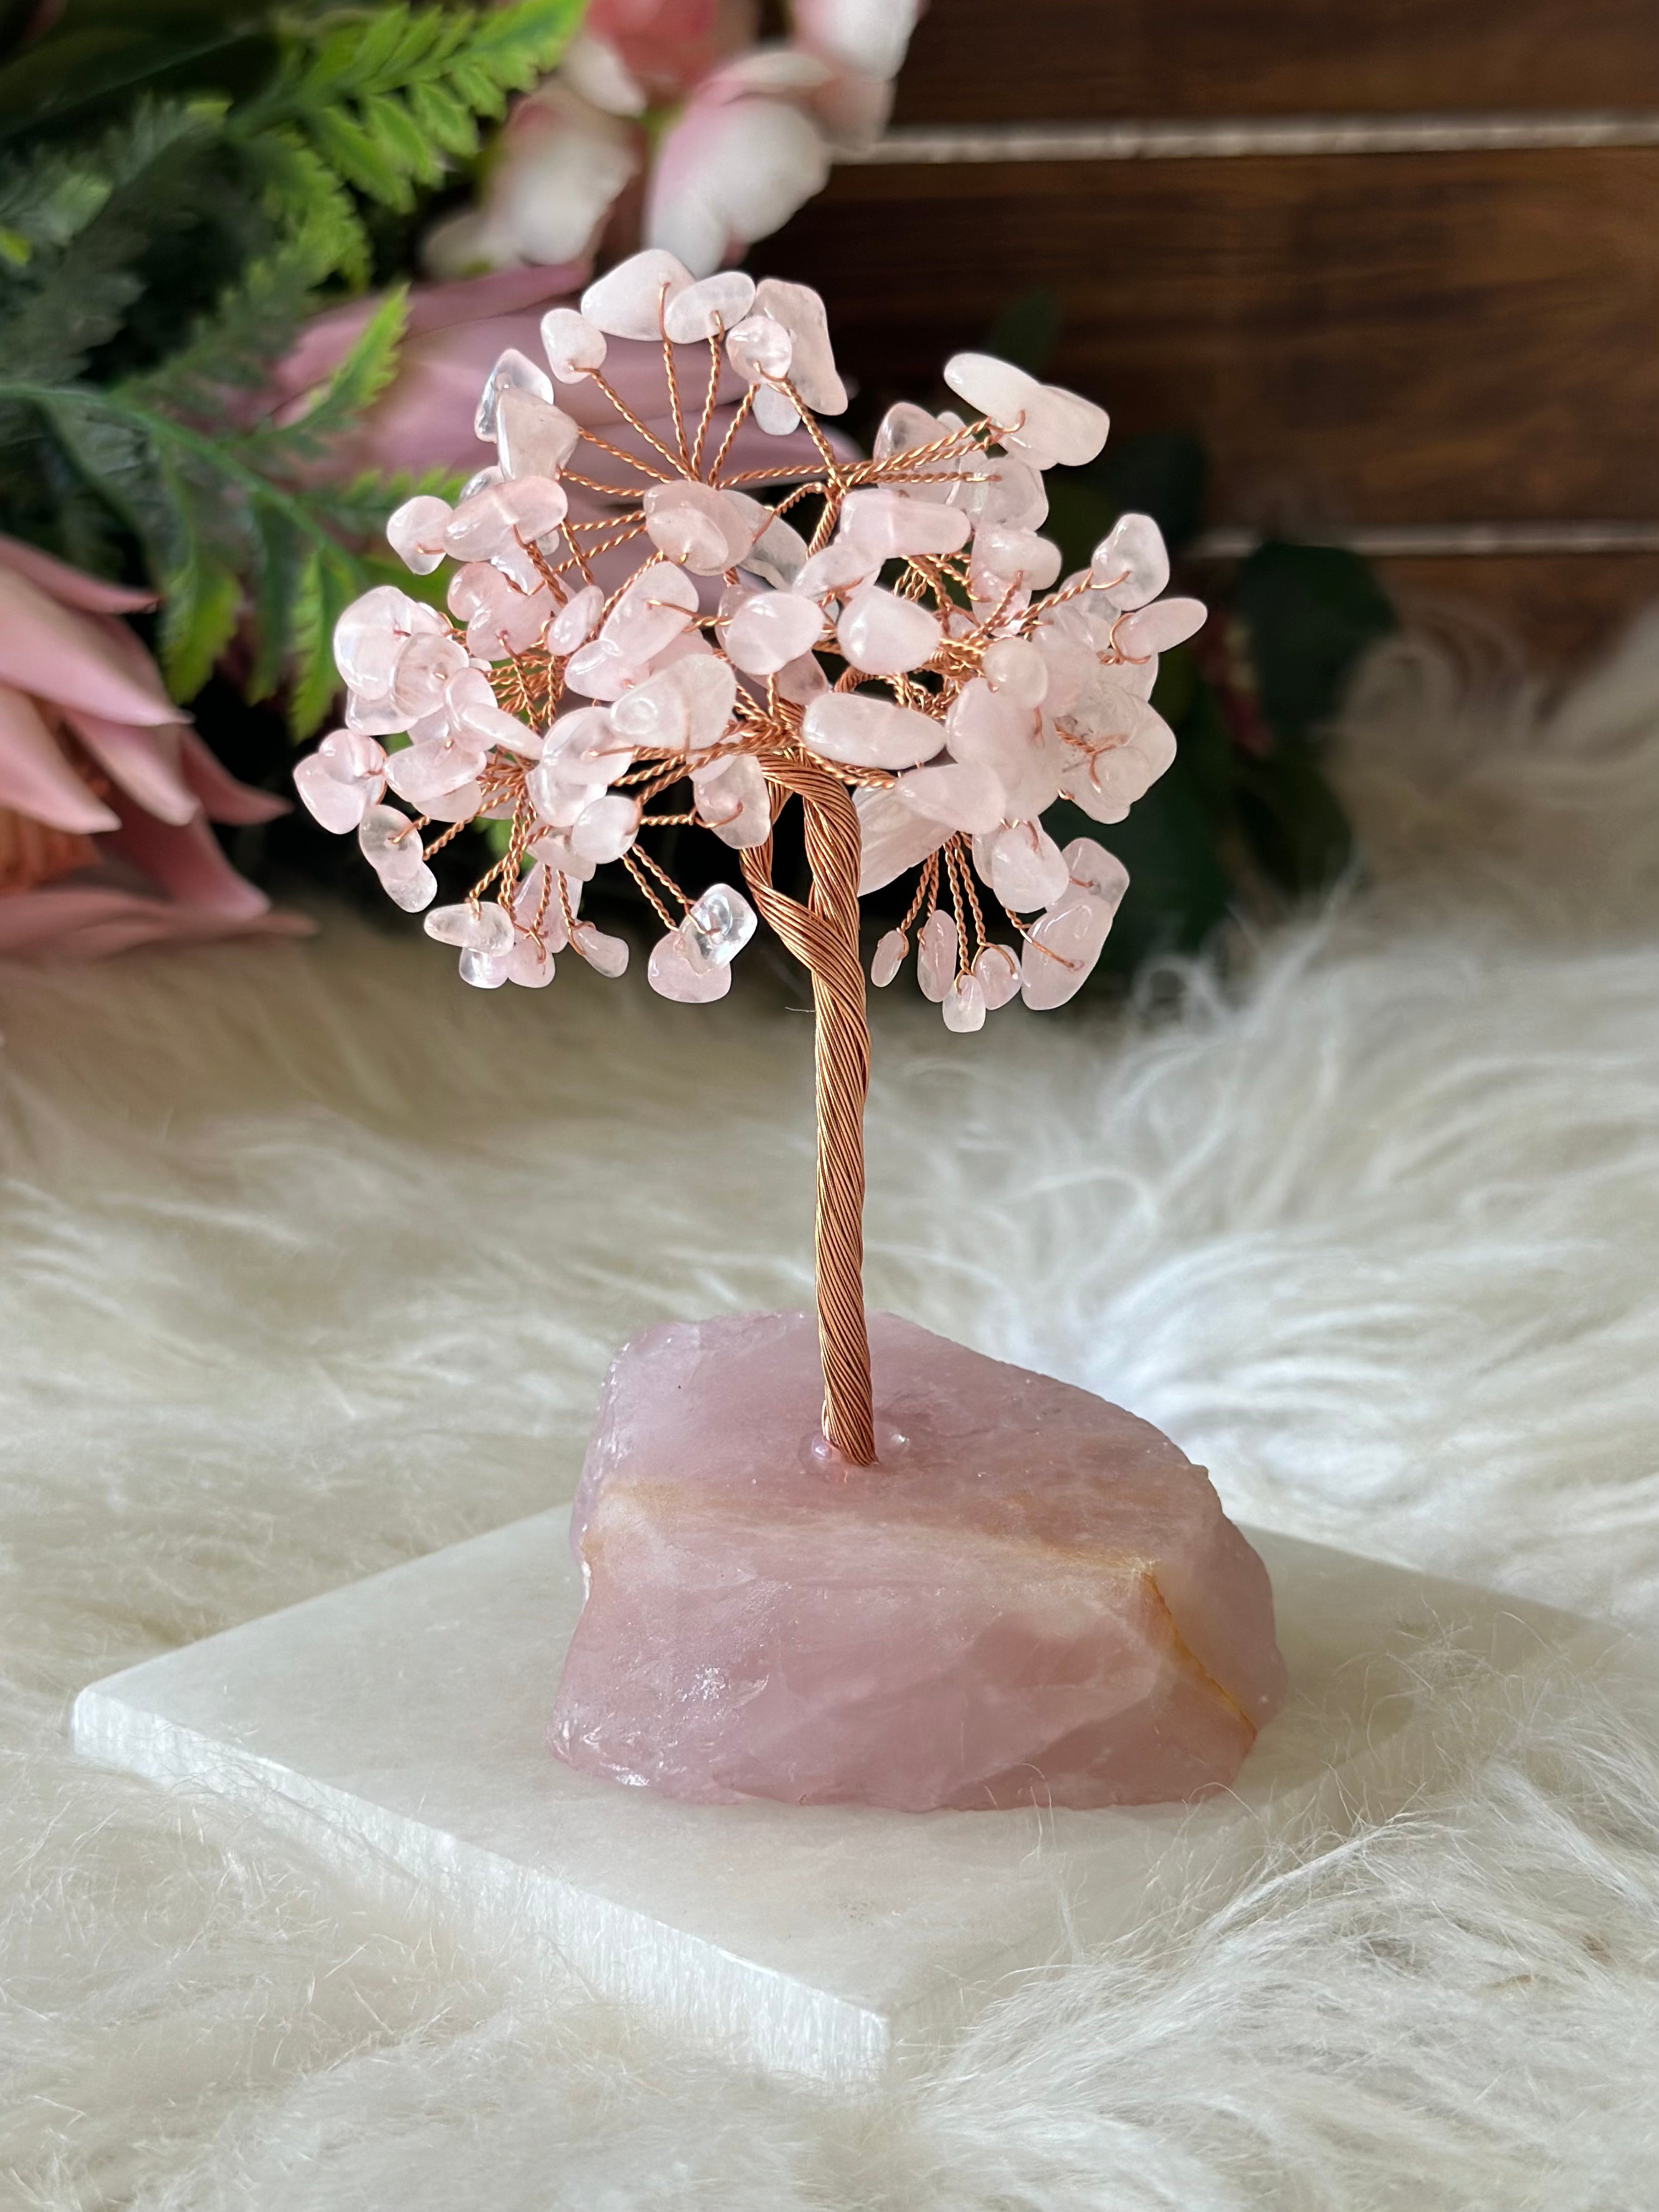 Rose Quartz Tree - Muse Crystals & Mystical Gifts